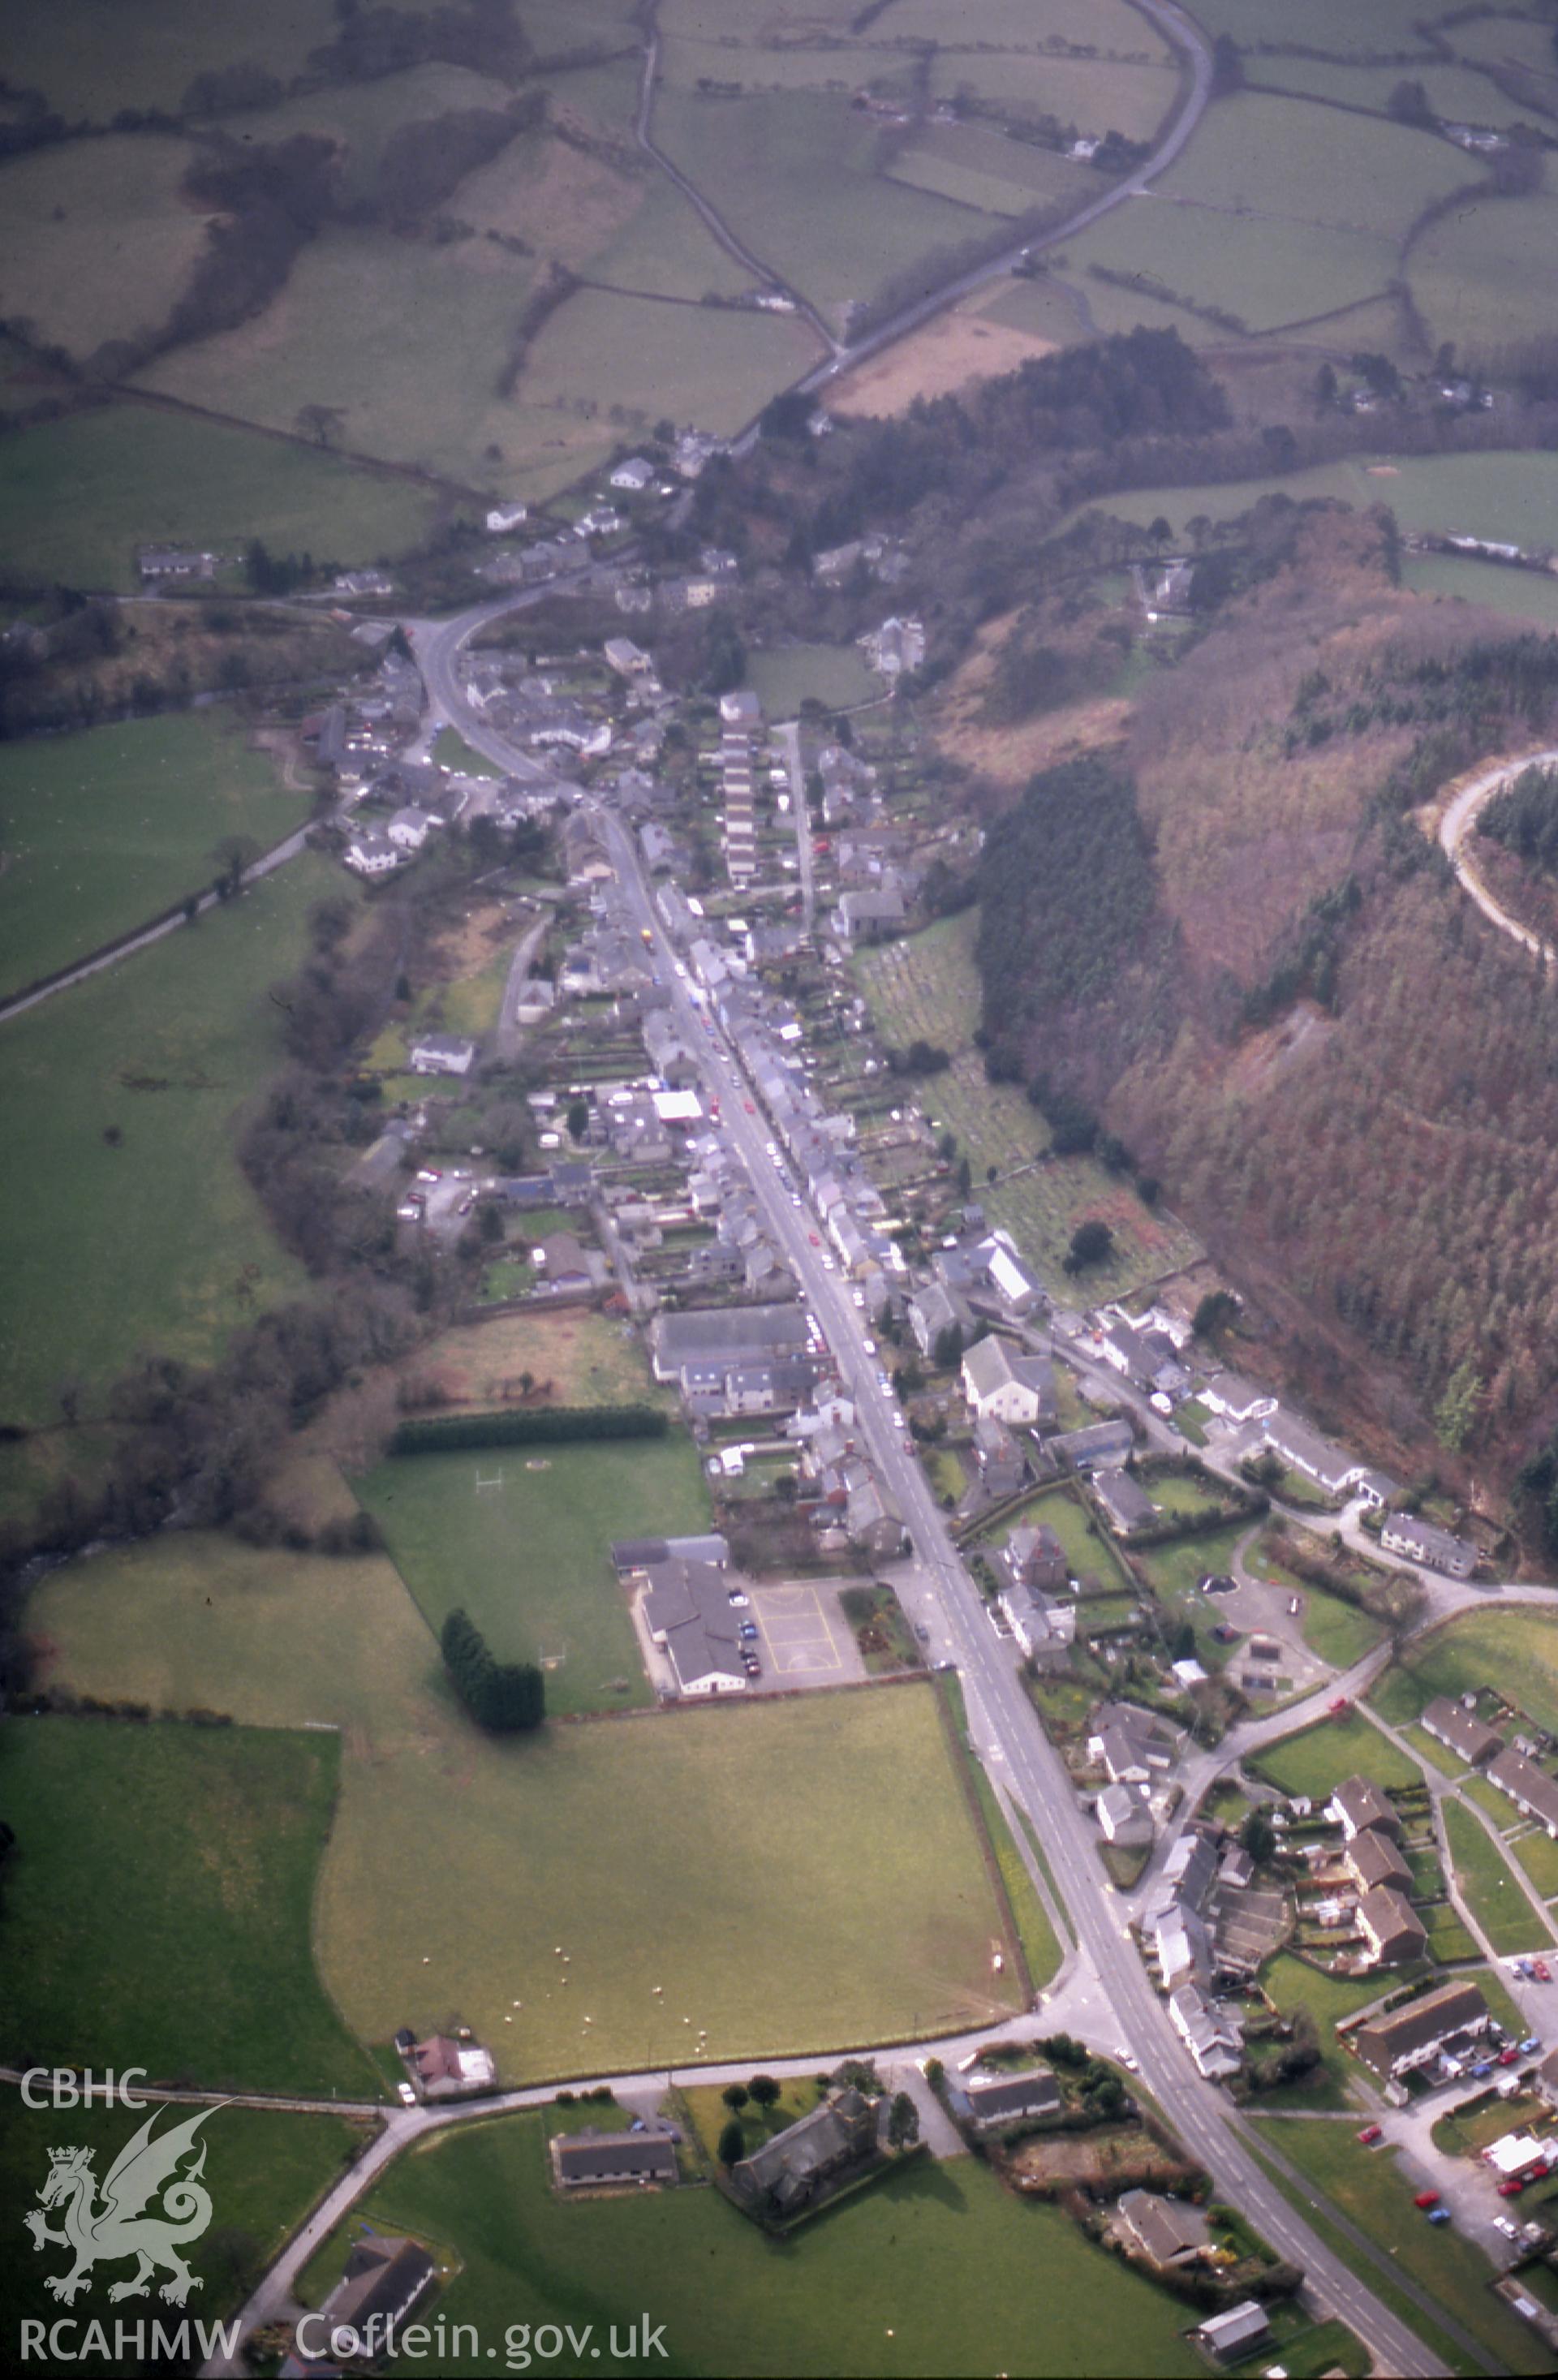 Slide of RCAHMW colour oblique aerial photograph of Talybont, taken by T.G. Driver, 19/3/1999.